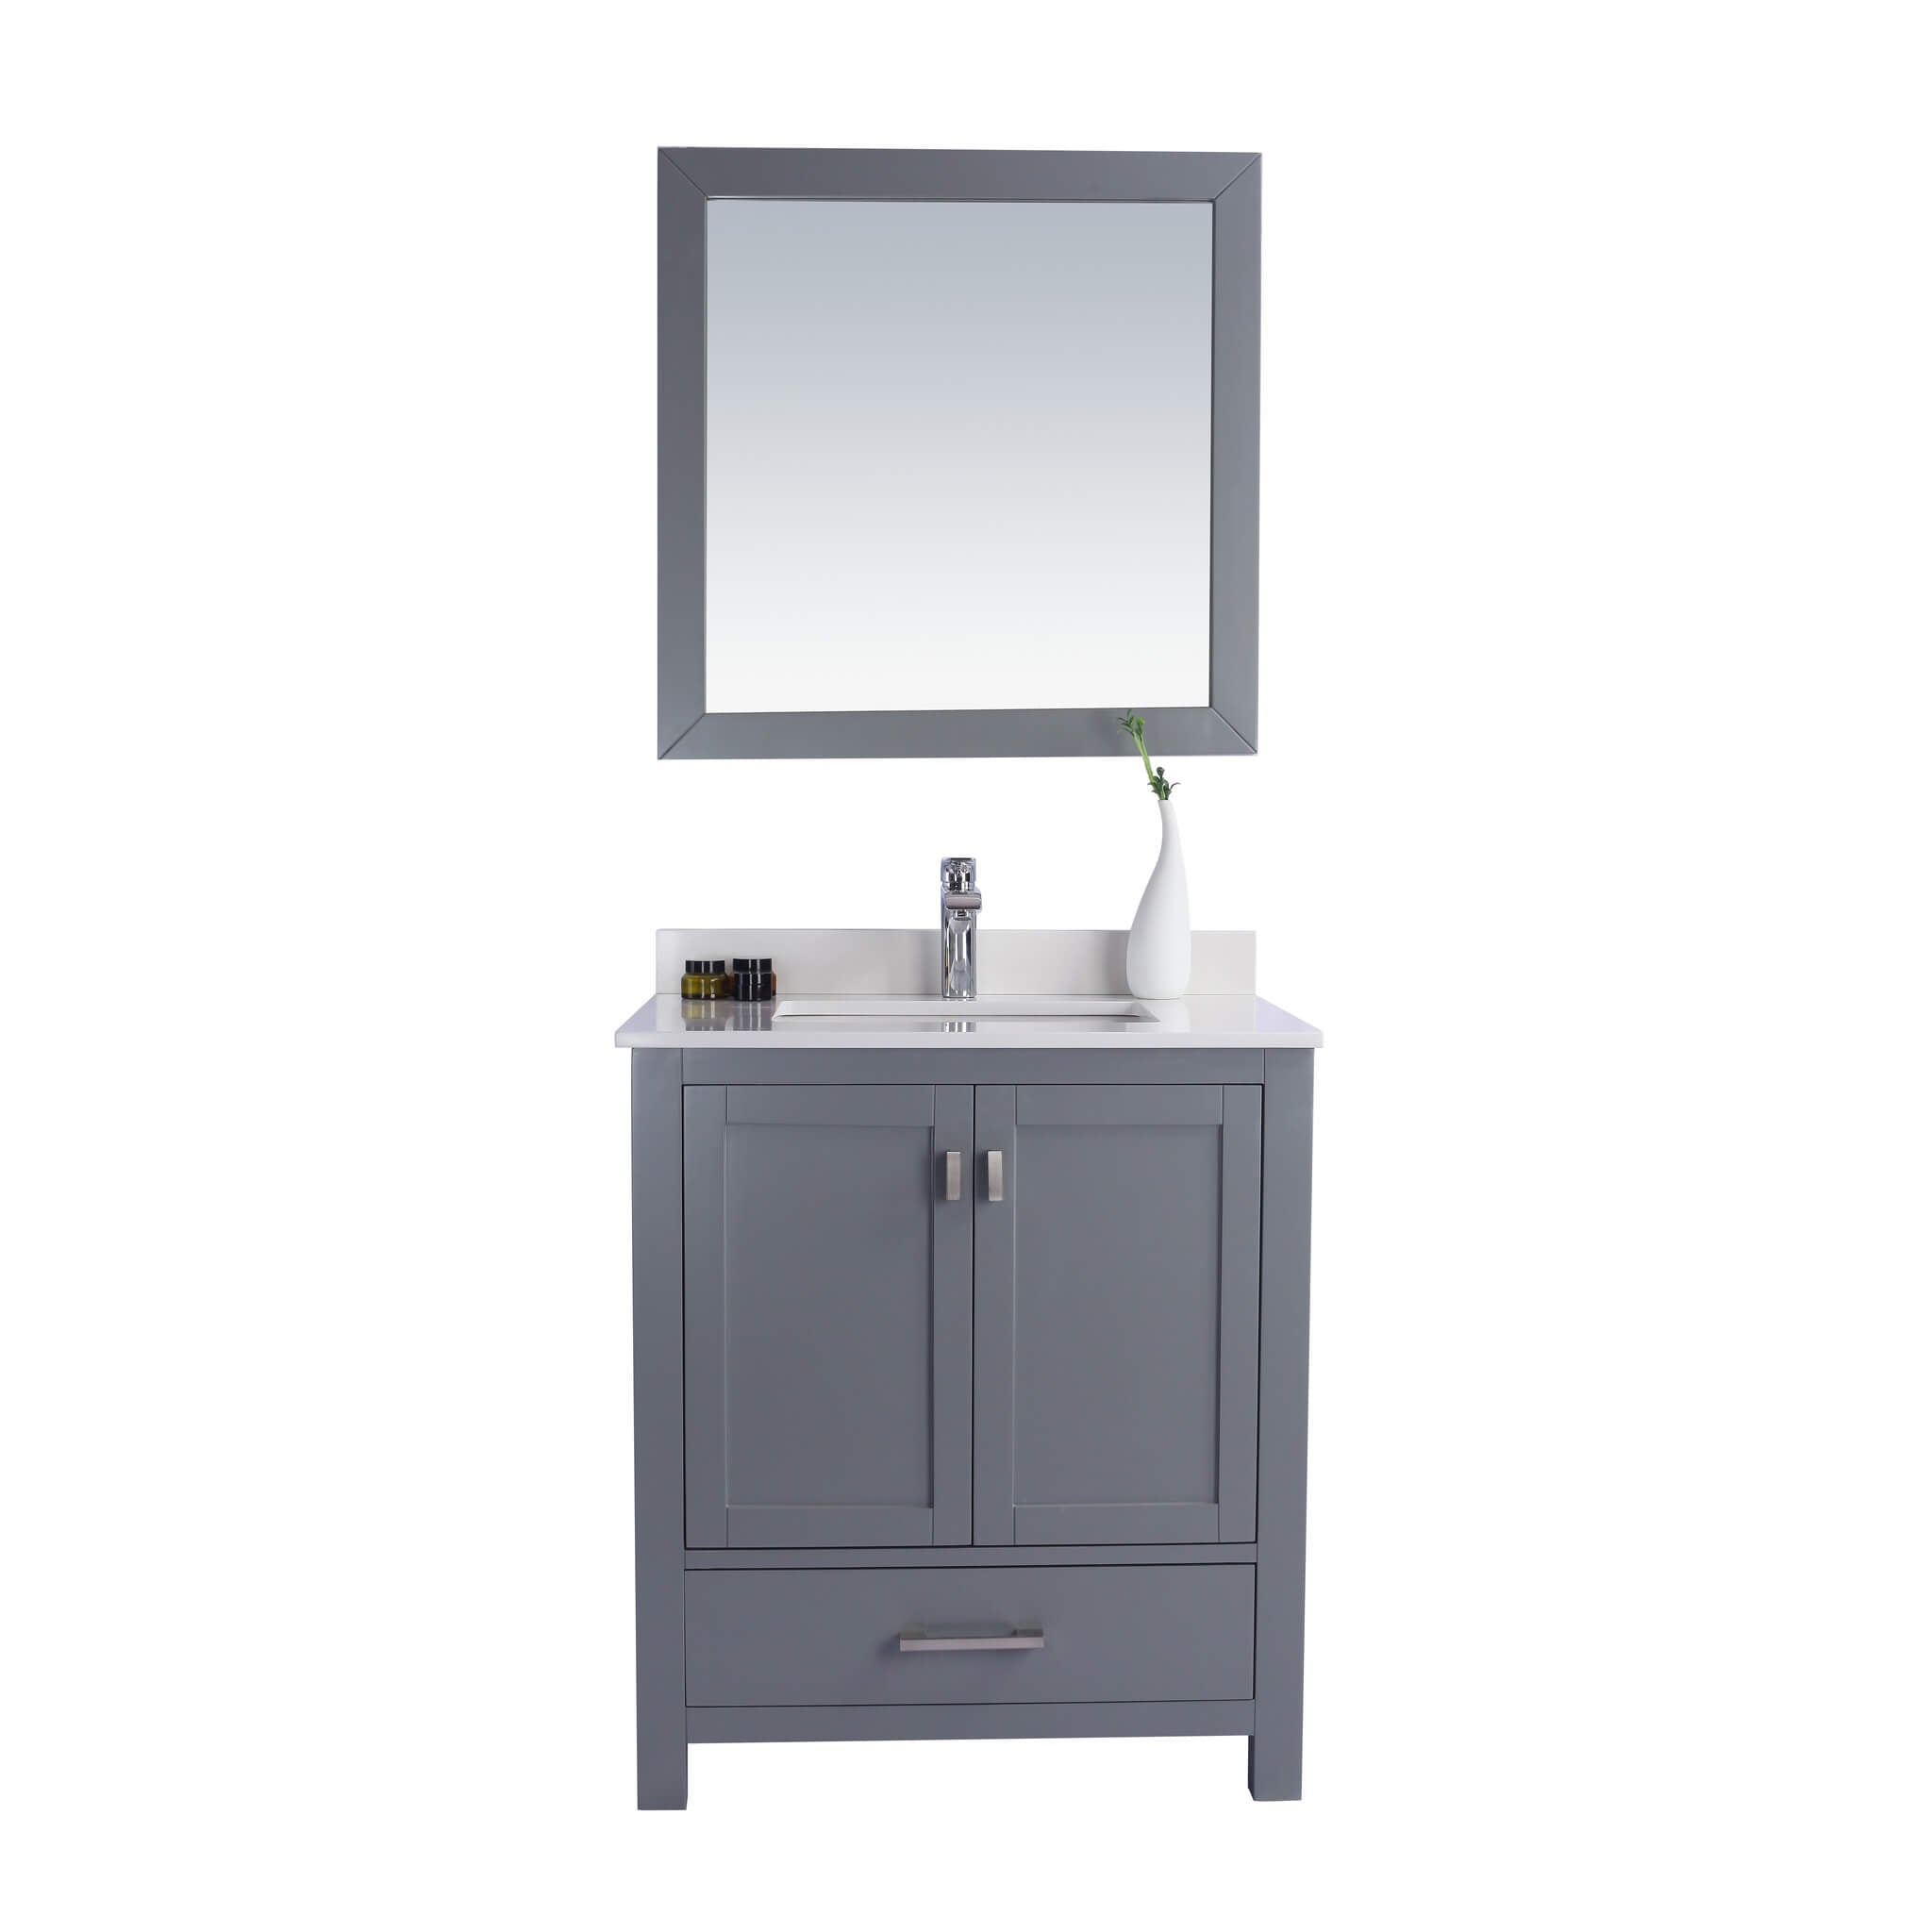 LAVIVA Wilson 313ANG-30G-WQ 30" Single Bathroom Vanity in Grey with White Quartz, White Rectangle Sink, Front View